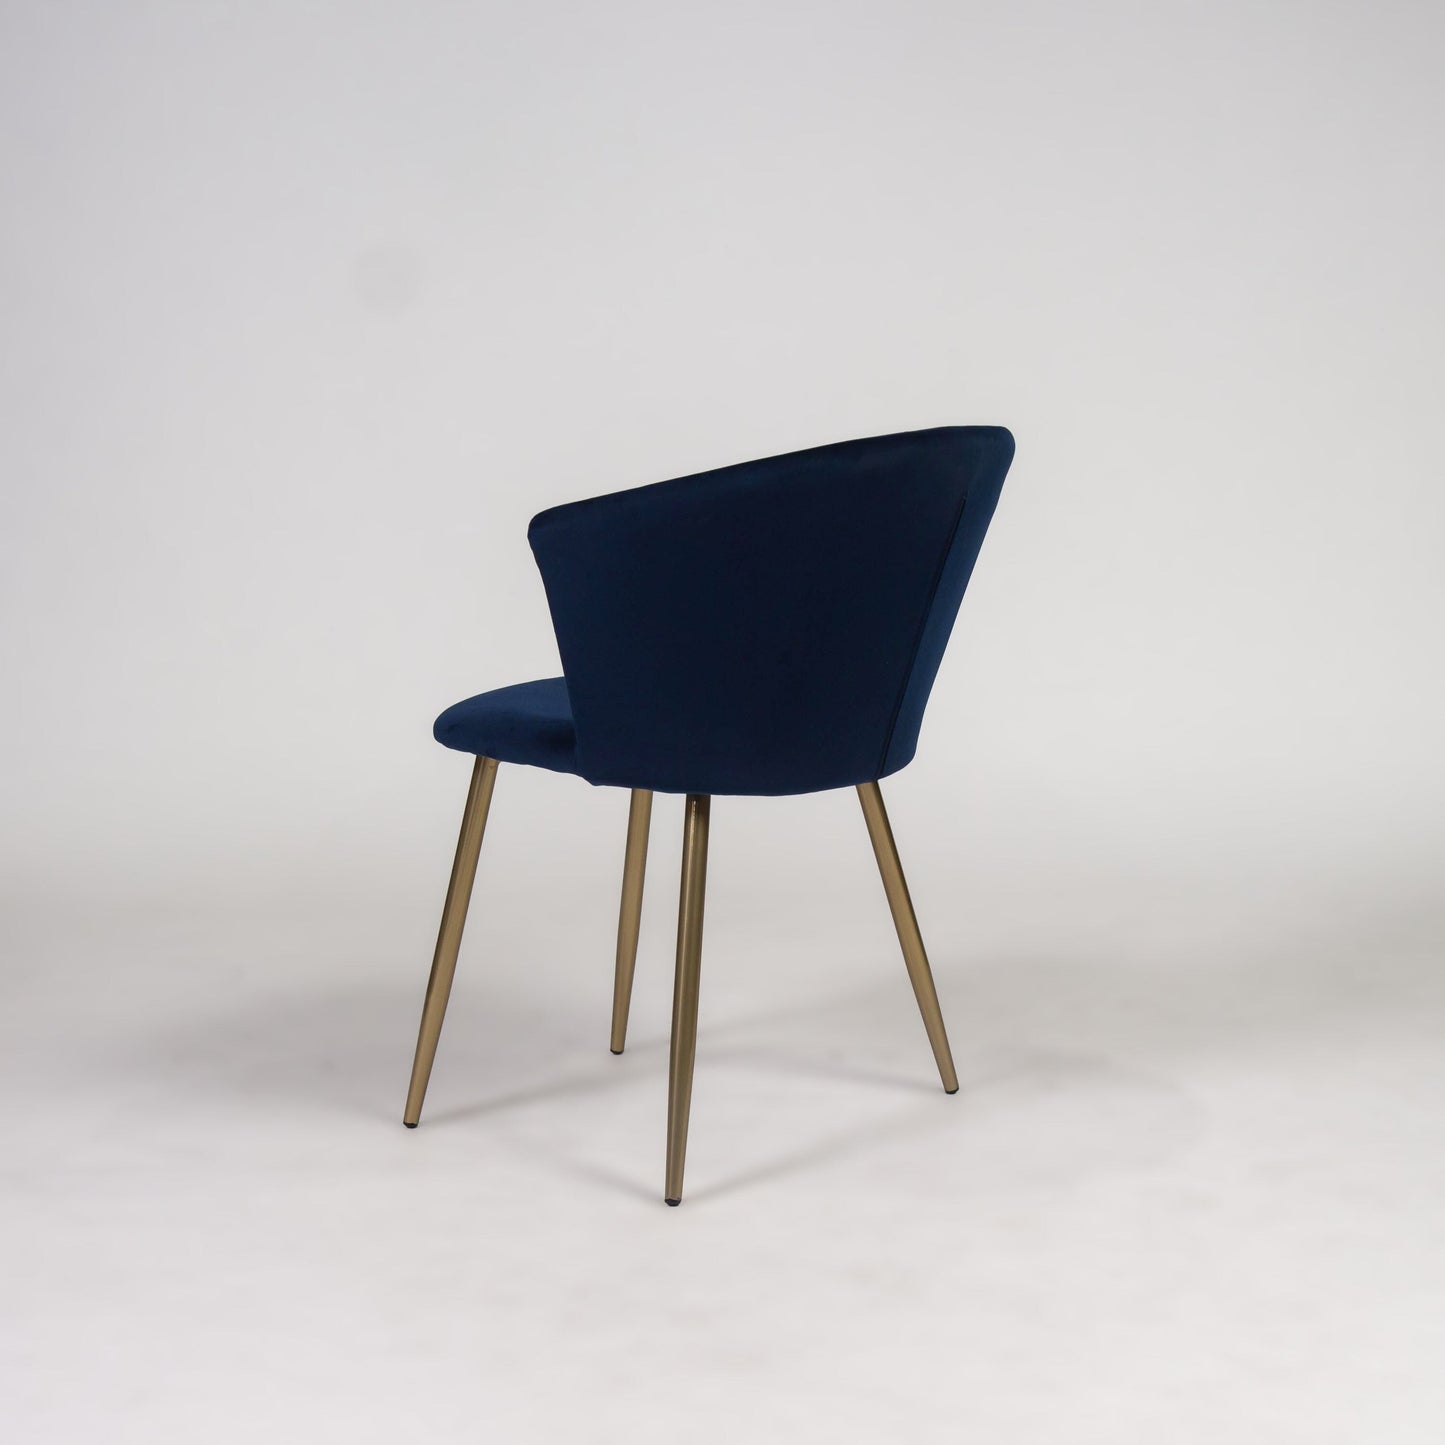 Cleo dining chairs - set of 2 - blue and gold